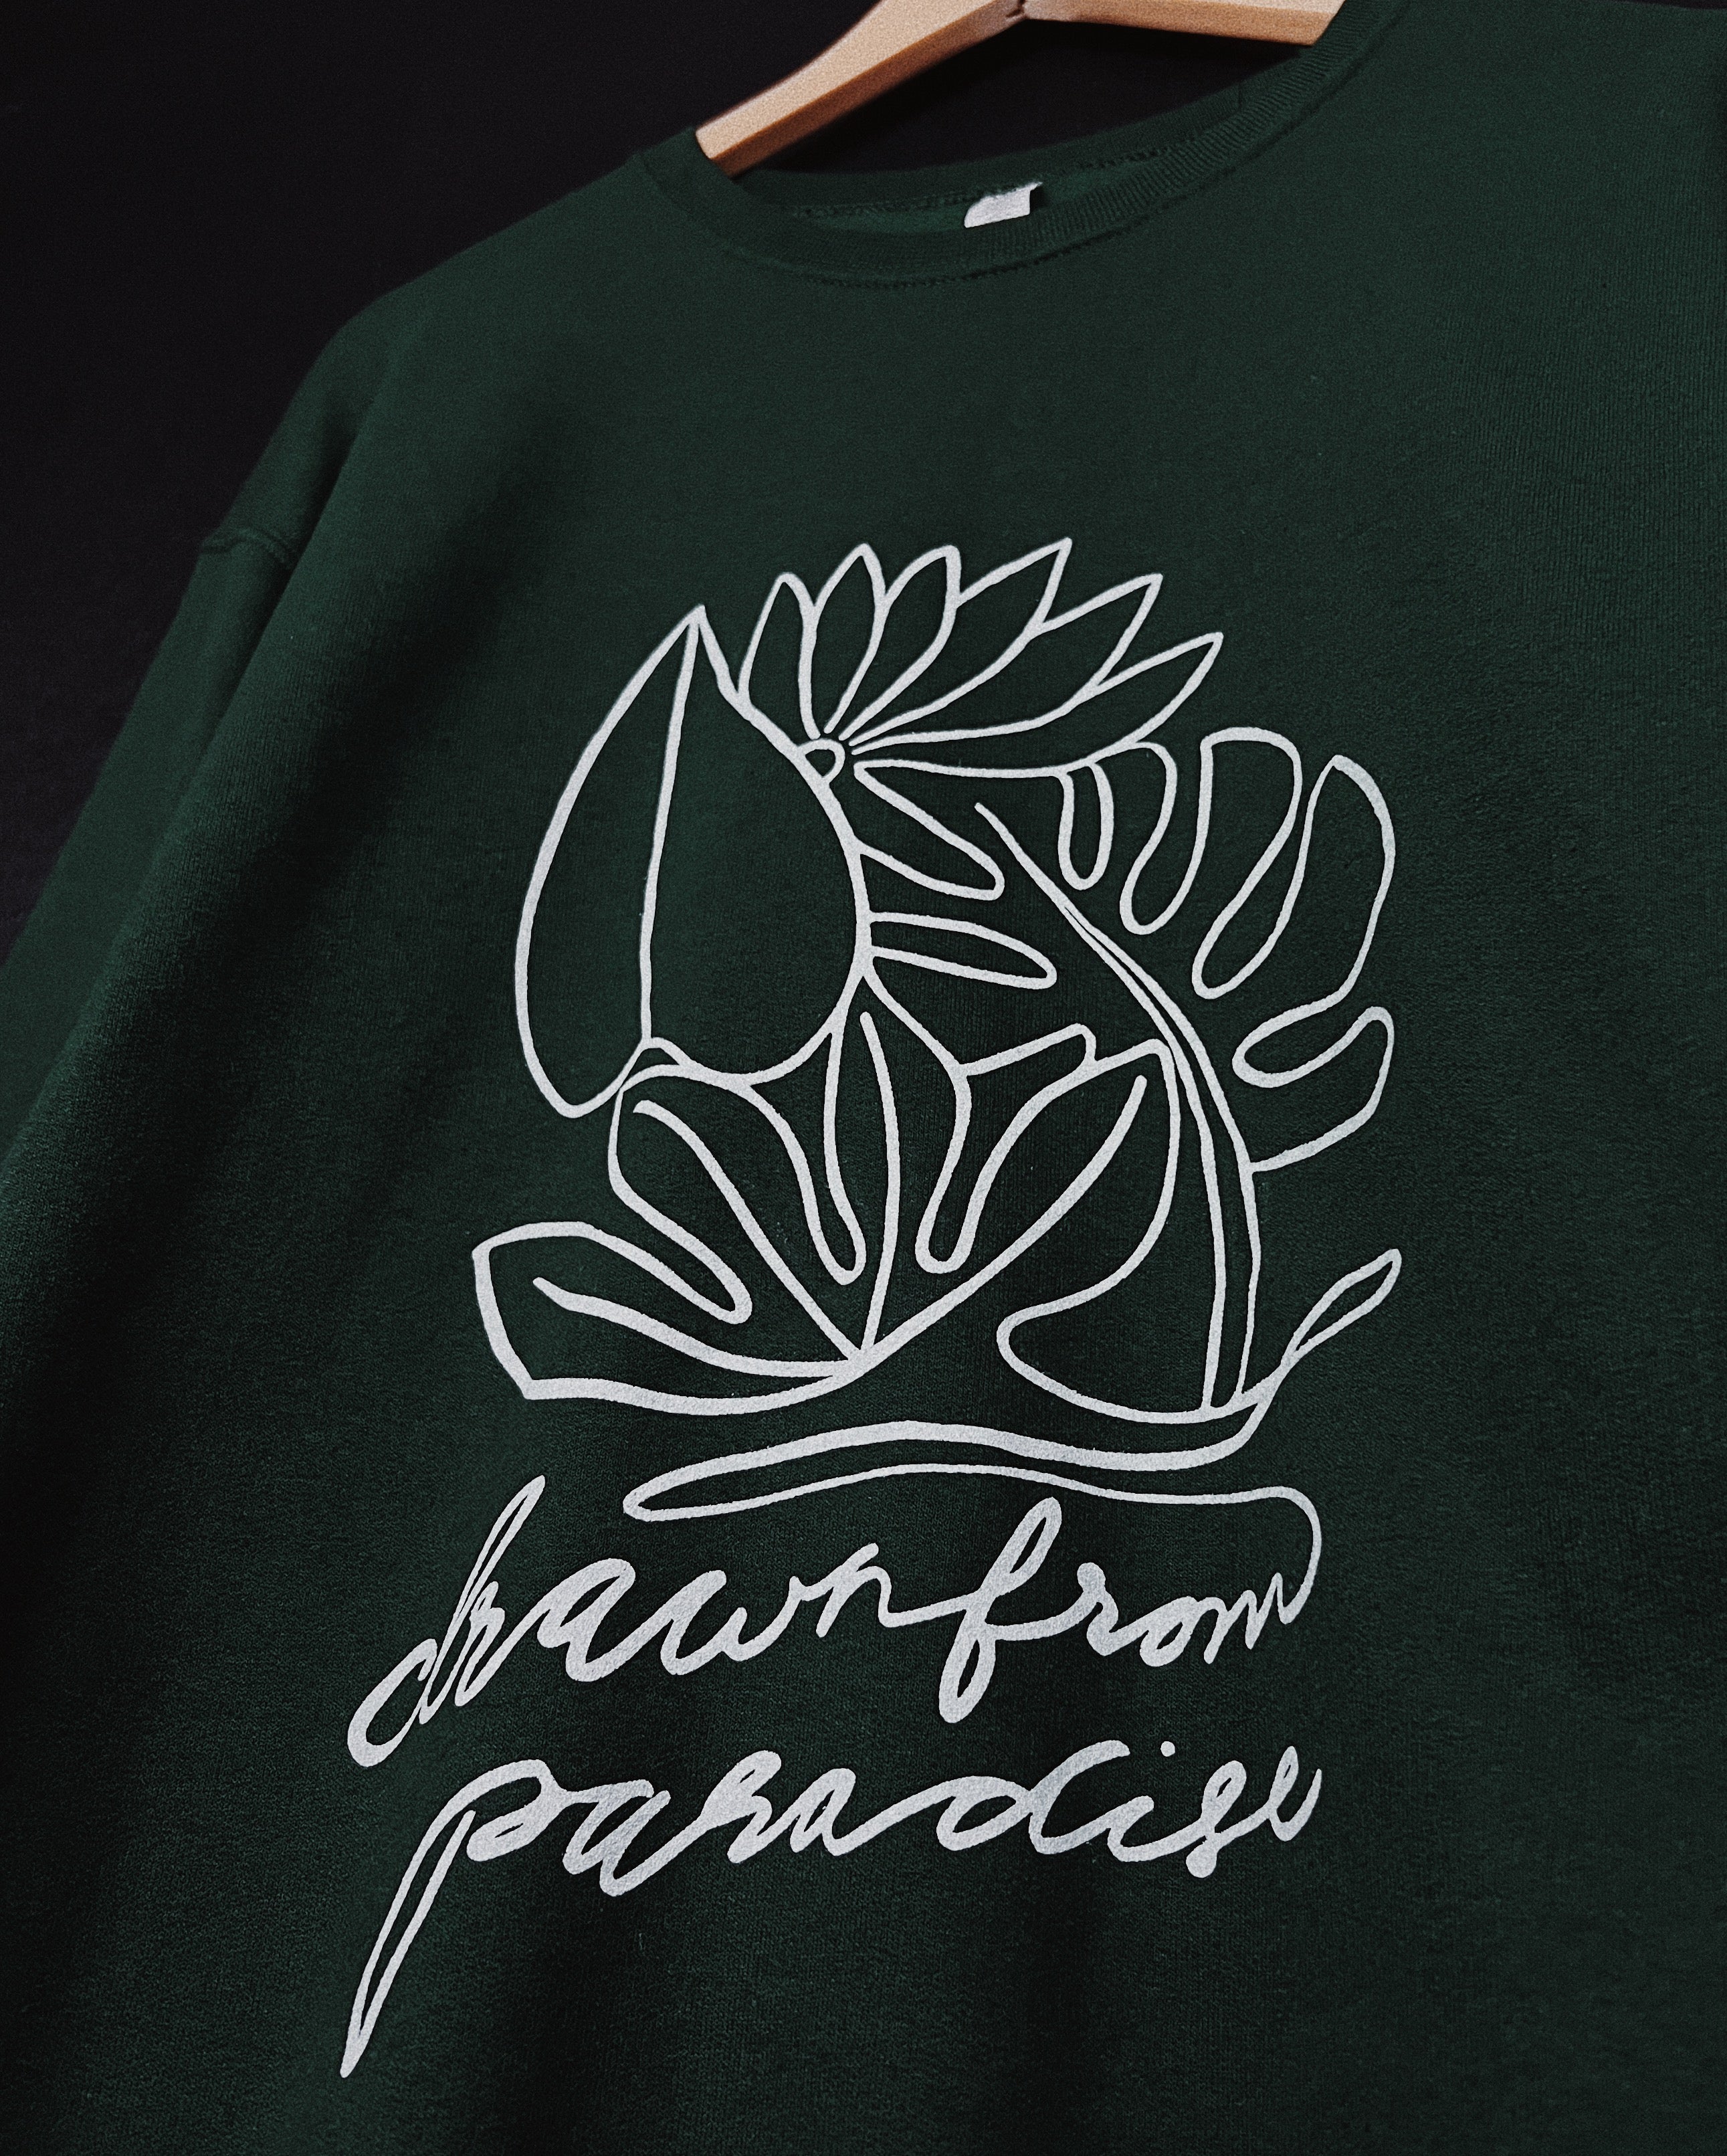 Drawn from Paradise Juniper Forest Unisex Crewneck Sweater